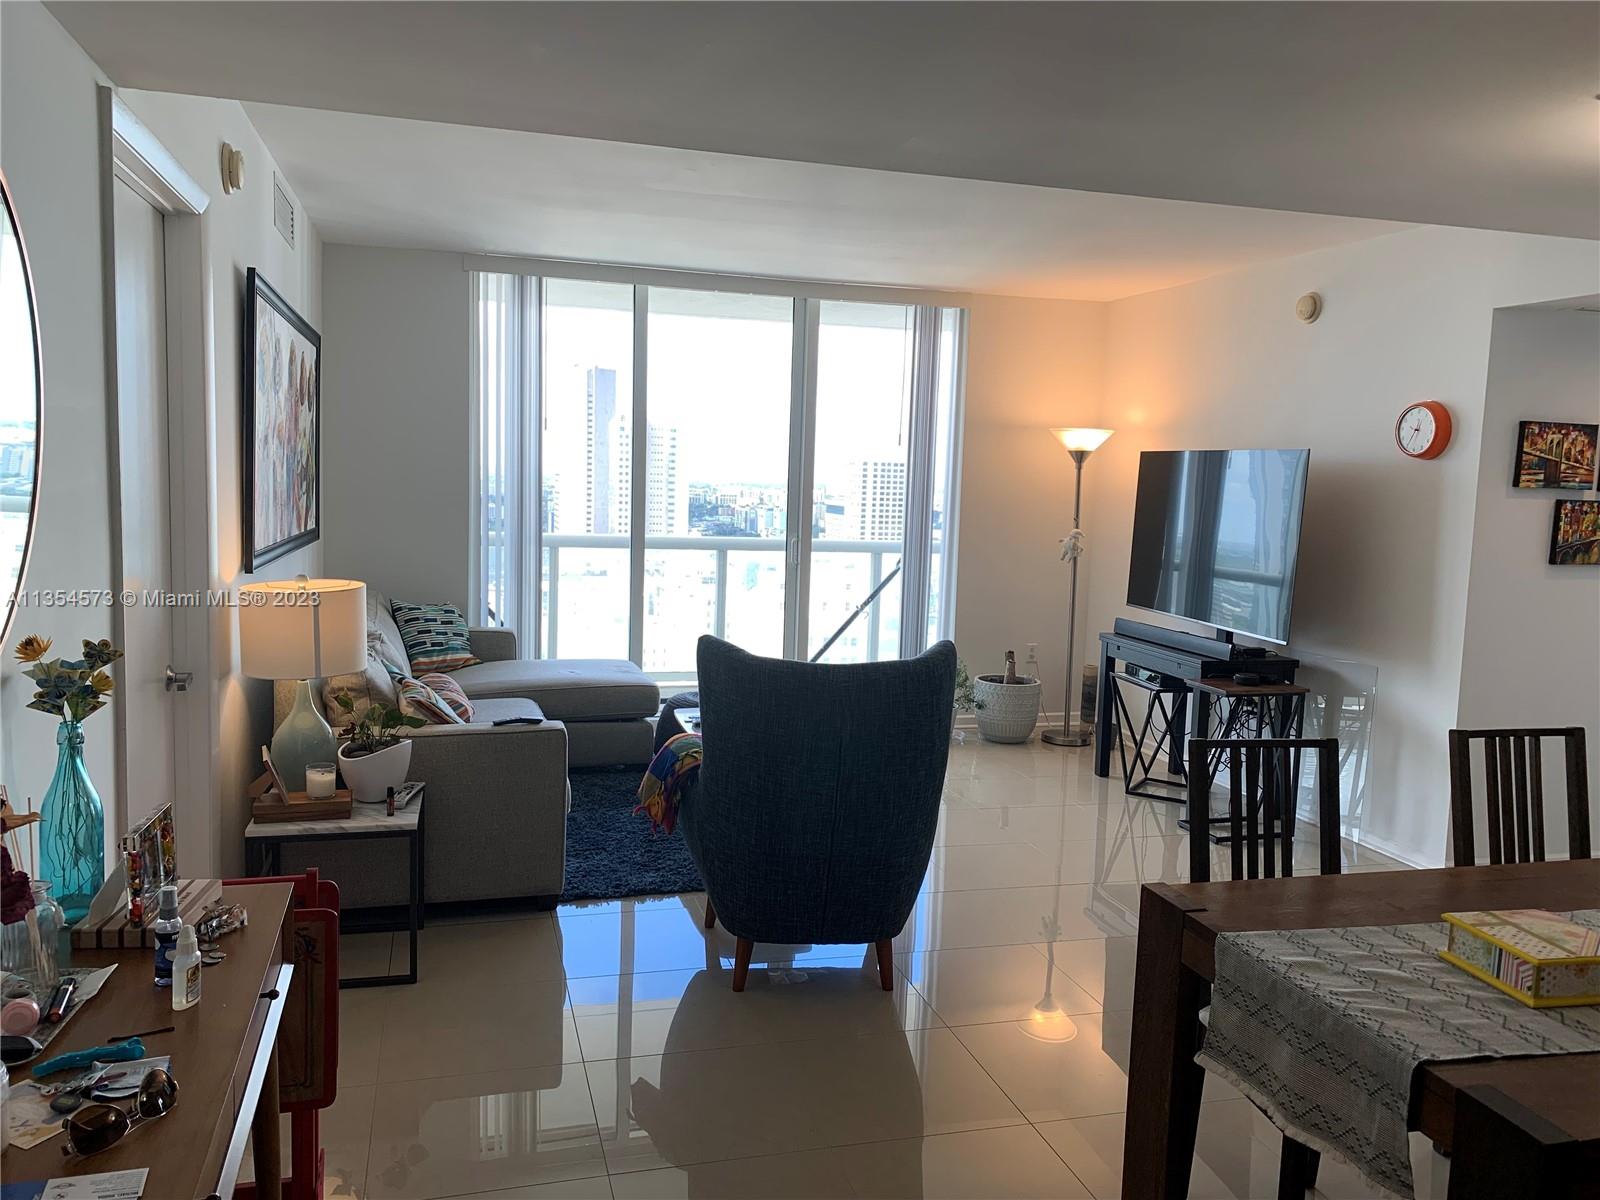 Breathtaking city and bay views with wrap around balcony! Building offers resort style amenities and is centrally located minutes from South Beach and Brickell, steps away metro rail, museum district and Miami Arena. This corner unit has a split floor plan, contemporary kitchen and baths with tile throughout: make this pristine home yours!!